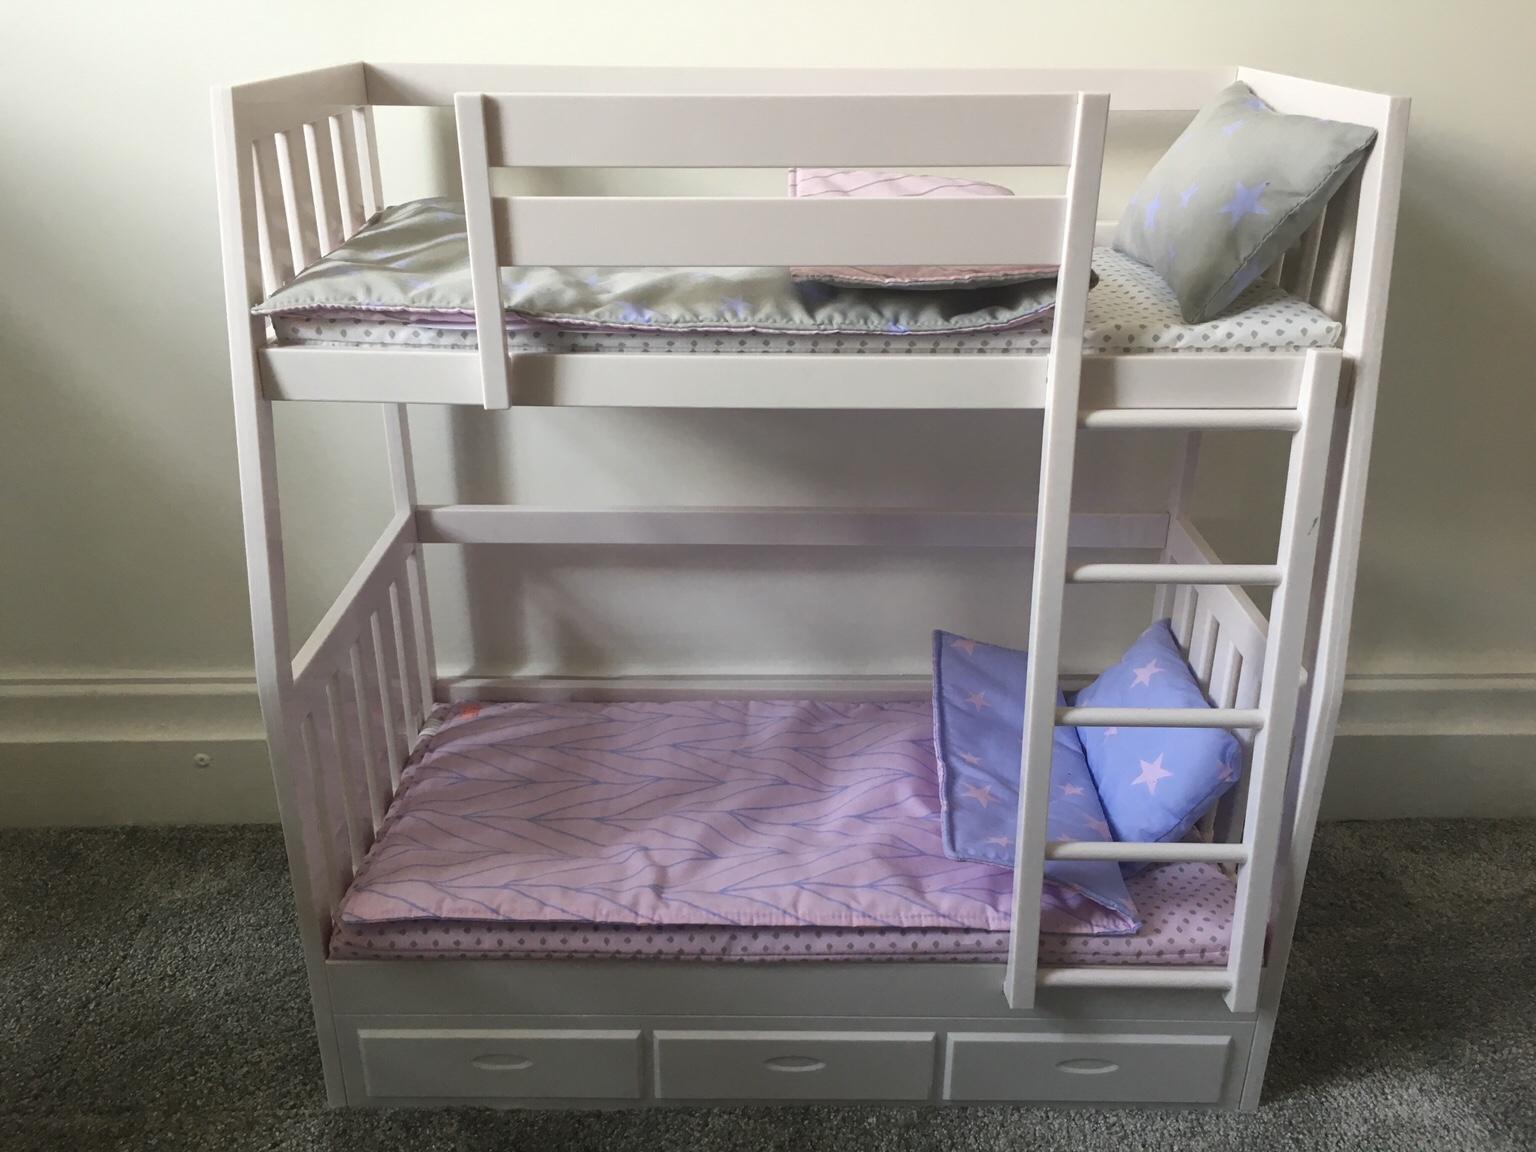 Our Generation Dream Bunk Beds In St, My Generation Bunk Beds